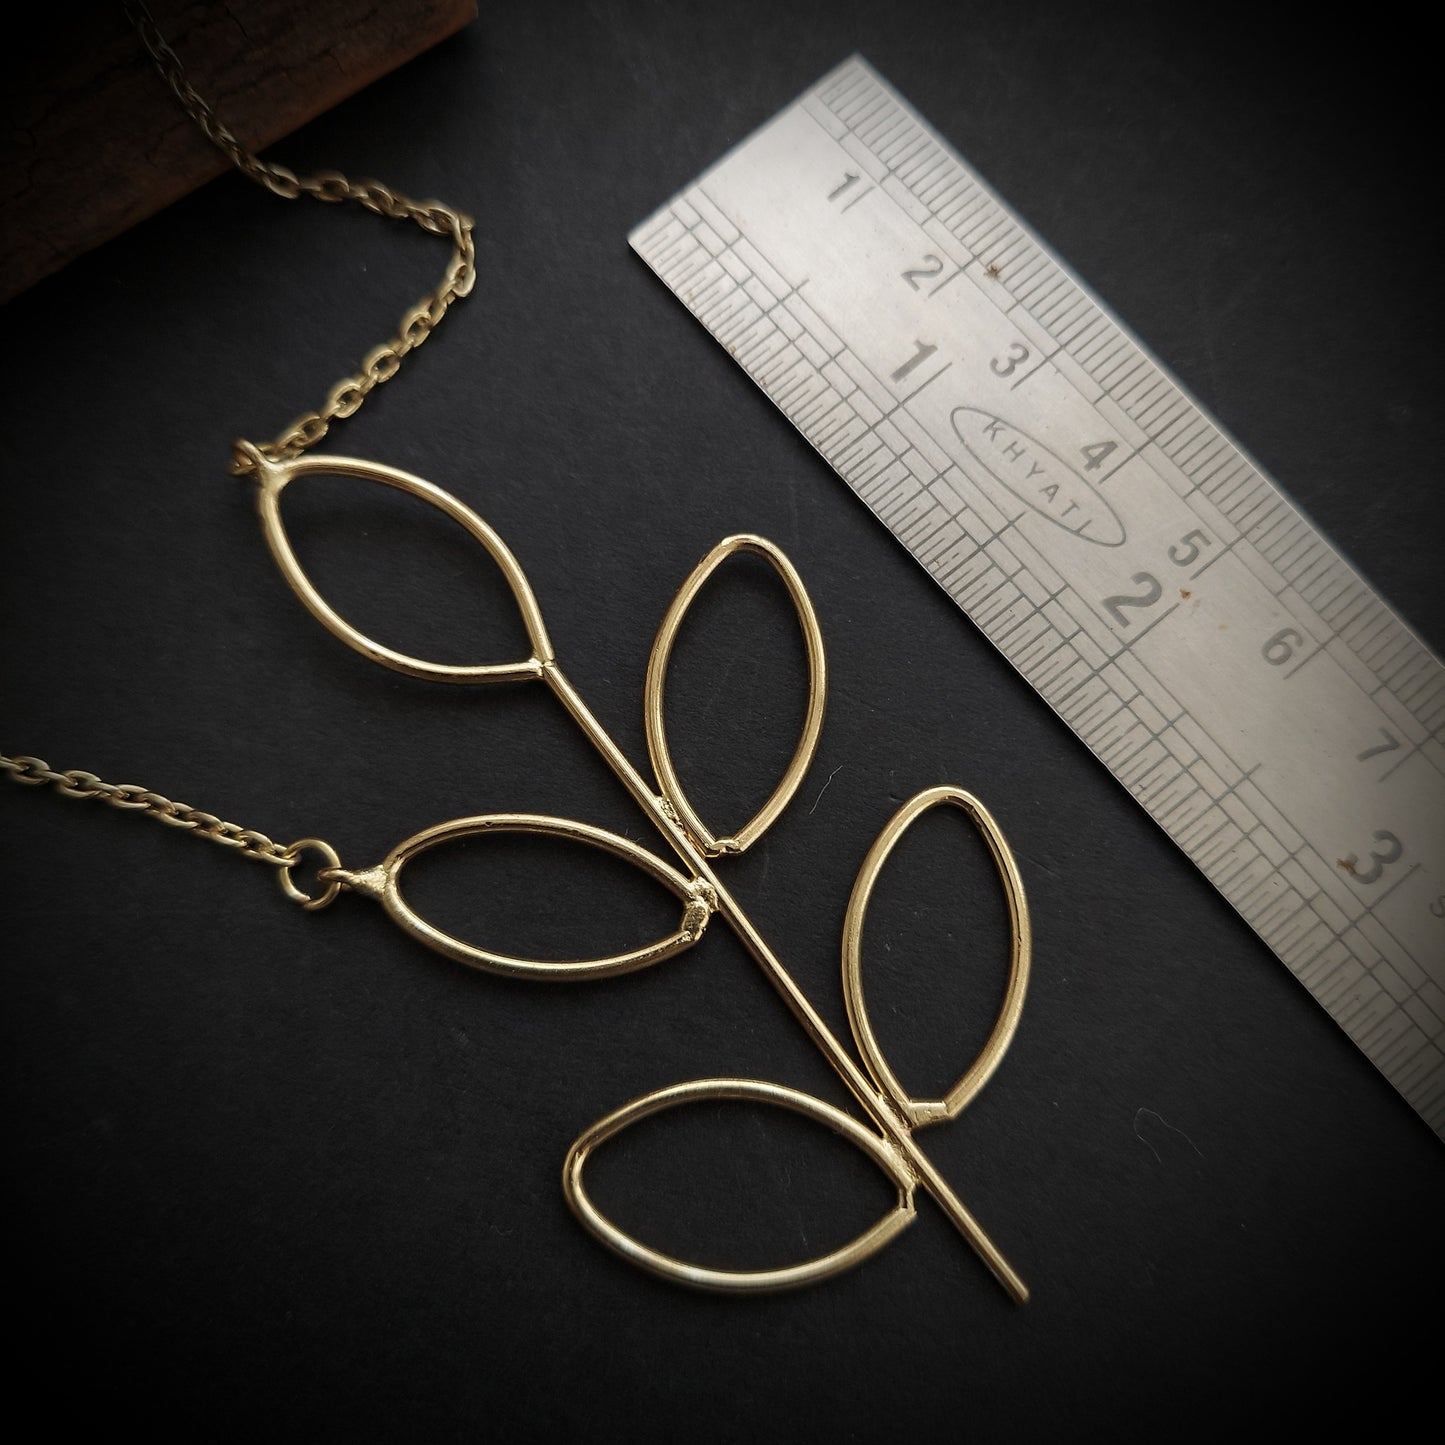 Stylish Long Brass Necklace with Pinnate Leaves Pendant